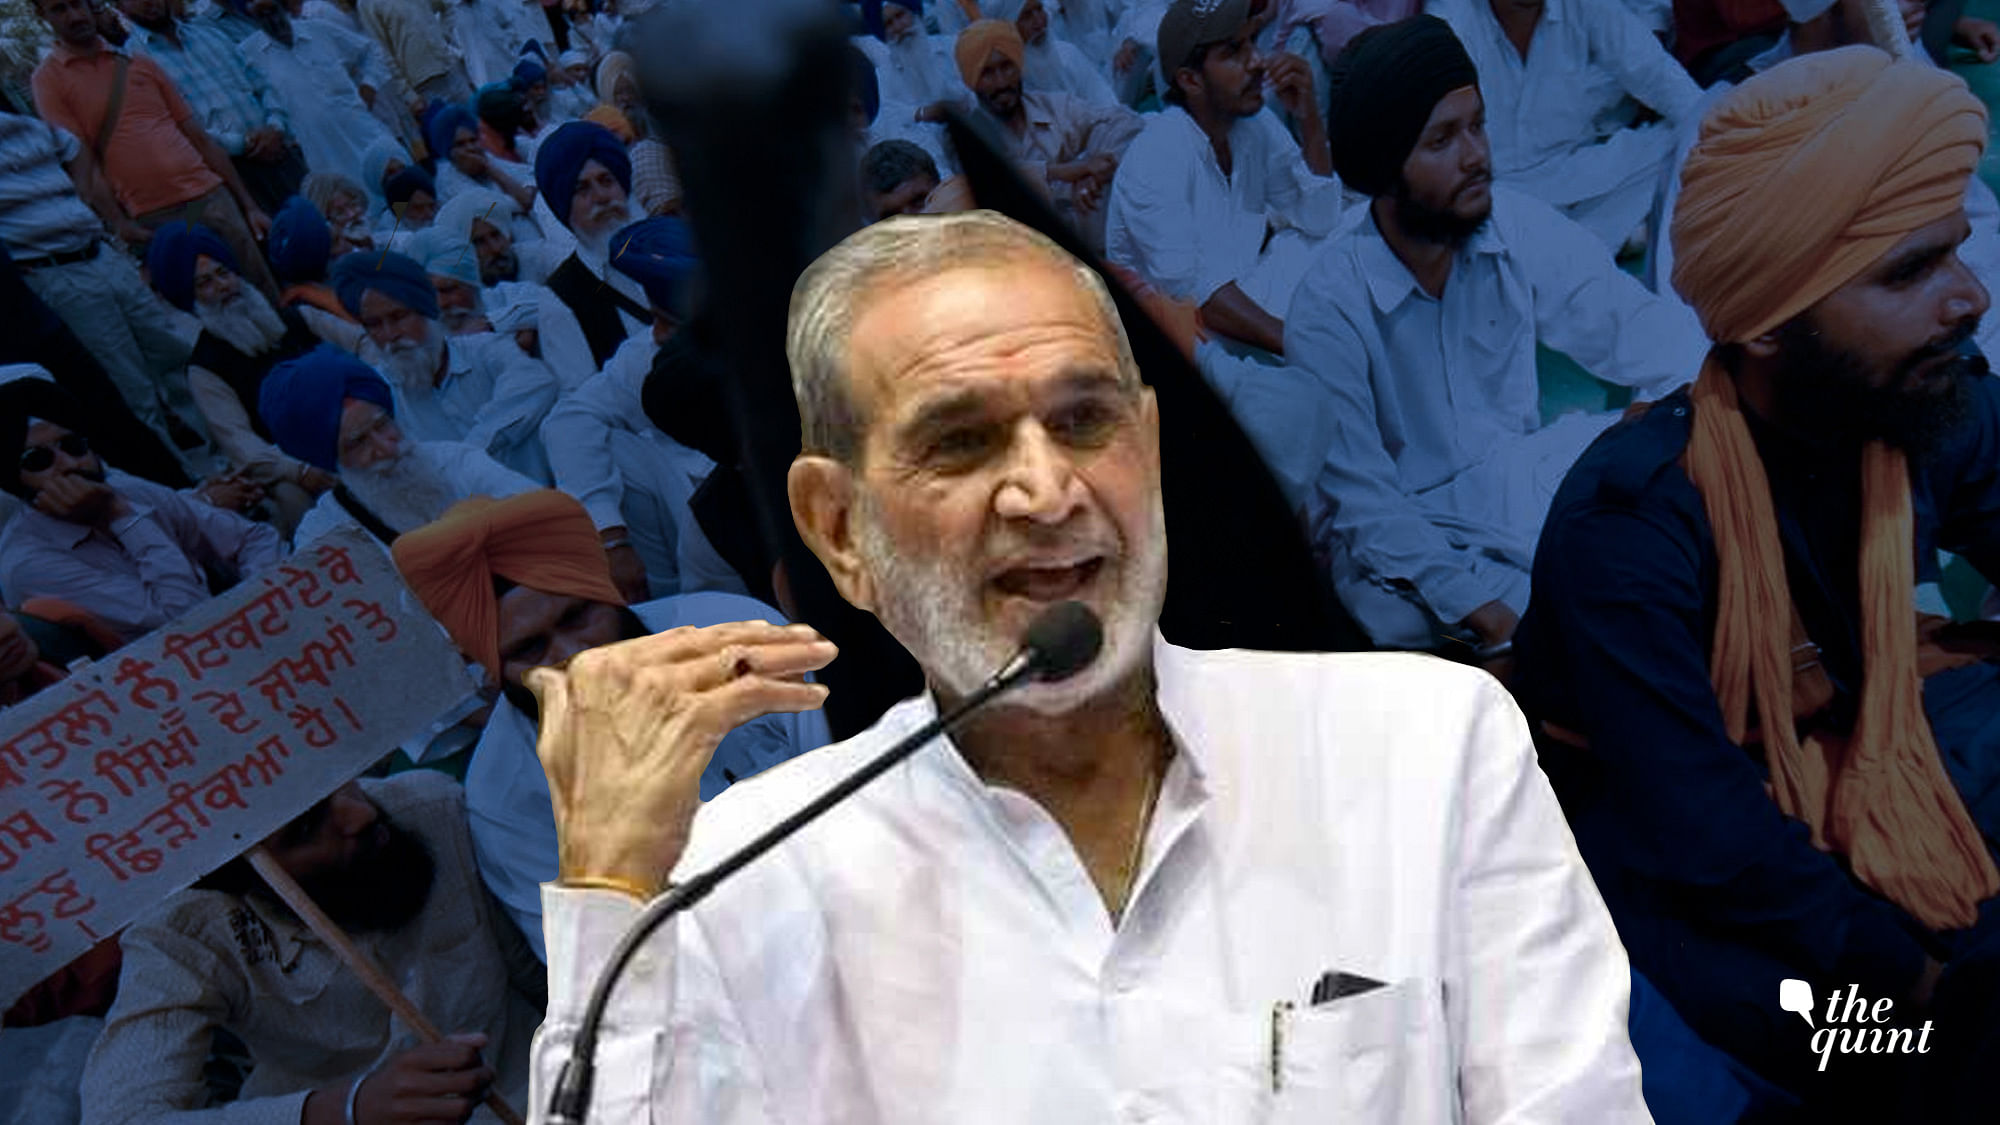 Delhi High Court reversed the acquittal of Congress leader Sajjan Kumar in relation to his role in the 1984 anti-Sikh riots, sentencing the Congress MP to life imprisonment.